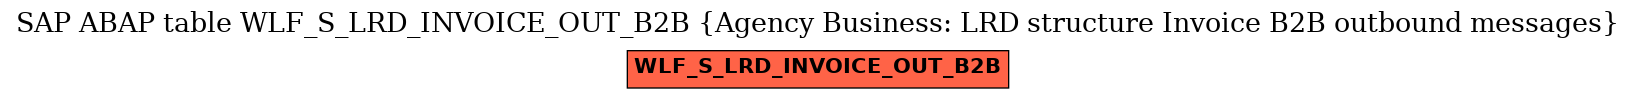 E-R Diagram for table WLF_S_LRD_INVOICE_OUT_B2B (Agency Business: LRD structure Invoice B2B outbound messages)